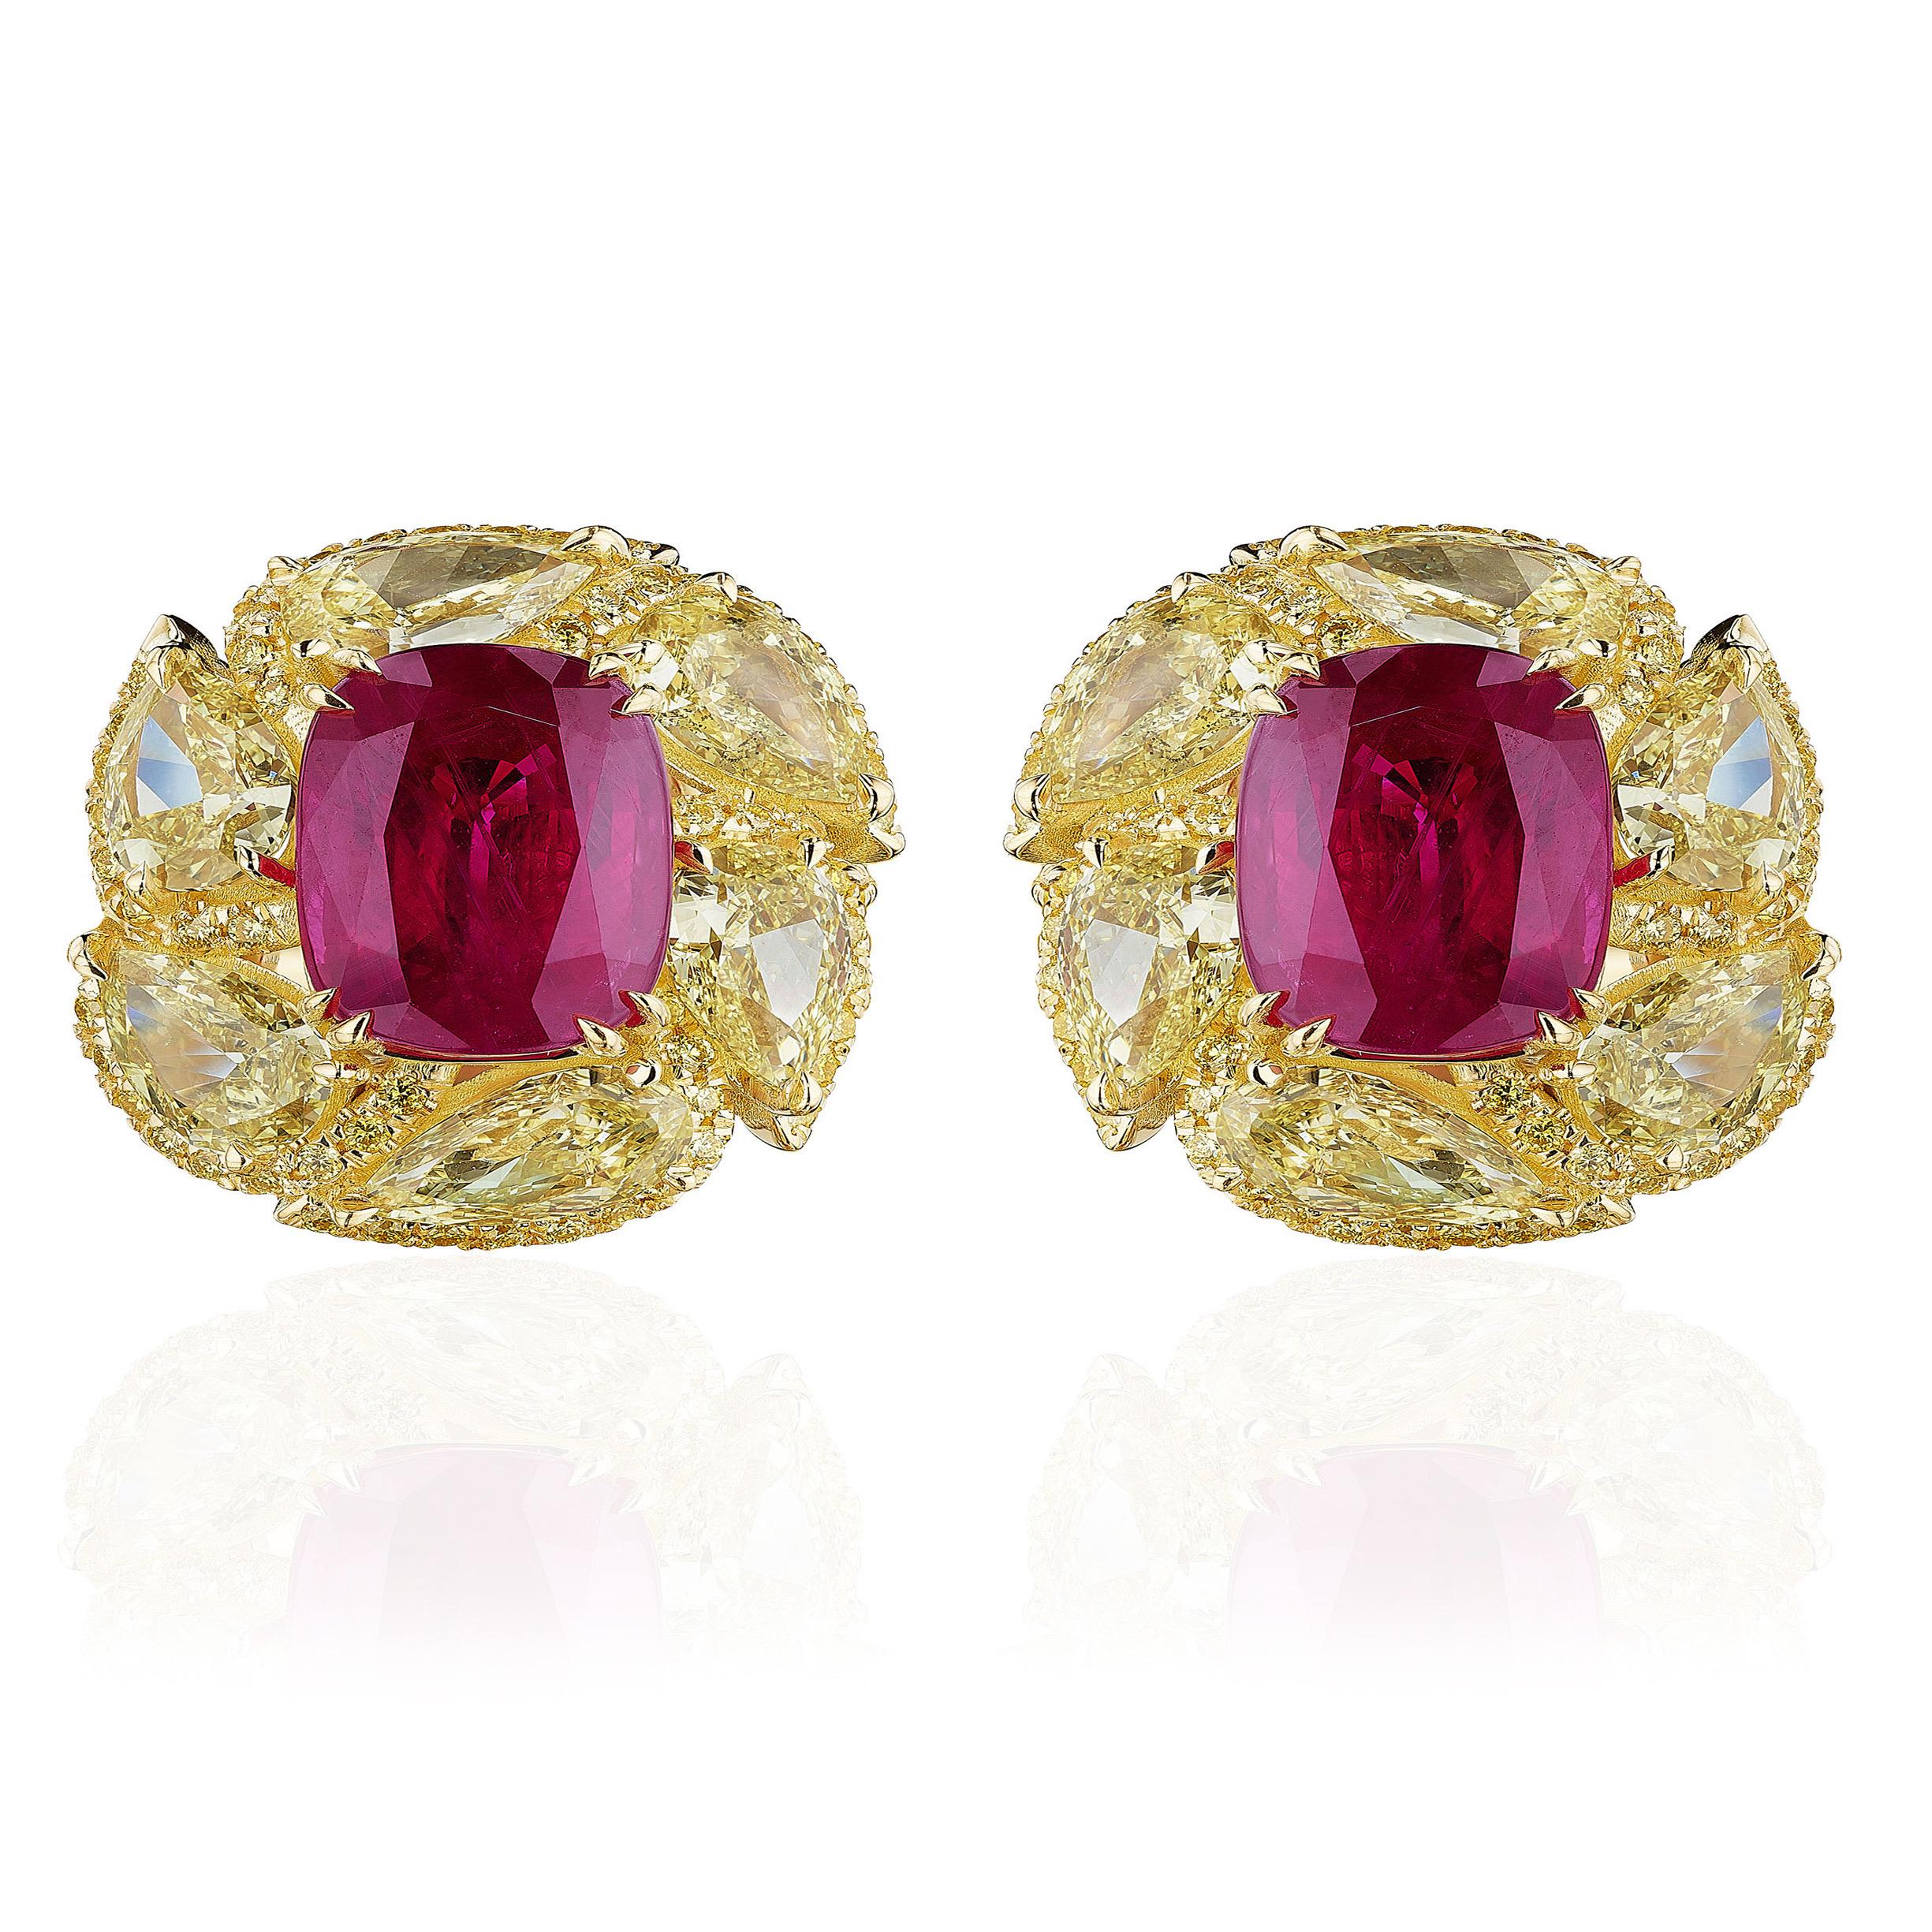 Centered upon 2 elongated Rubies weighing a total of 7.63 Carats.
Certified by GIA as Heated.

Surrounded by Pear shaped Yellow Diamonds and Round Yellow Diamonds weighing 5.20 Carats.

Set in 18 Karat Yellow Gold